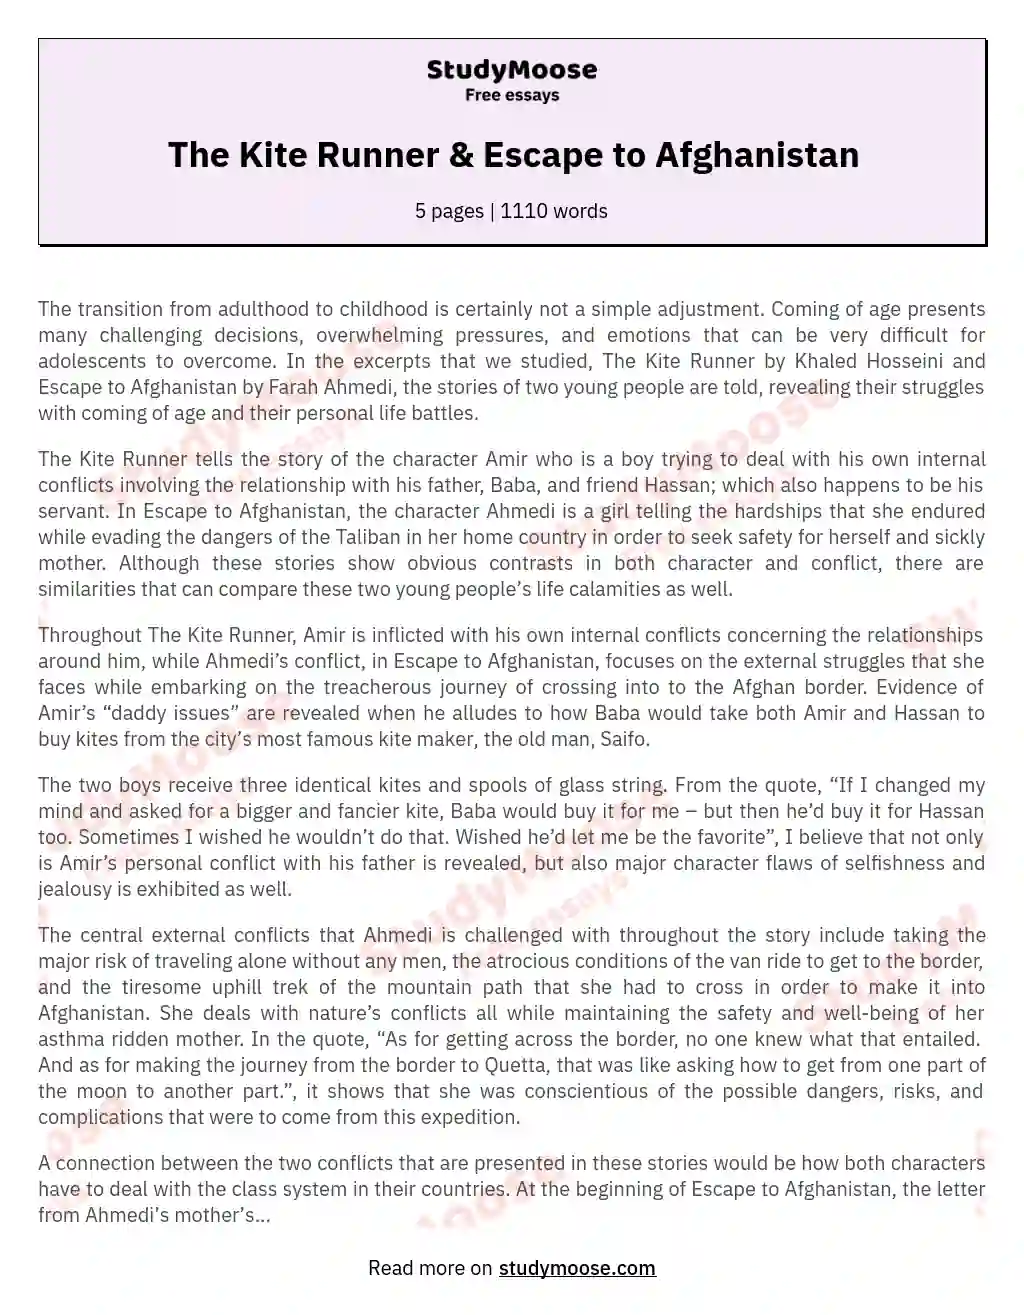 The Kite Runner &amp; Escape to Afghanistan essay